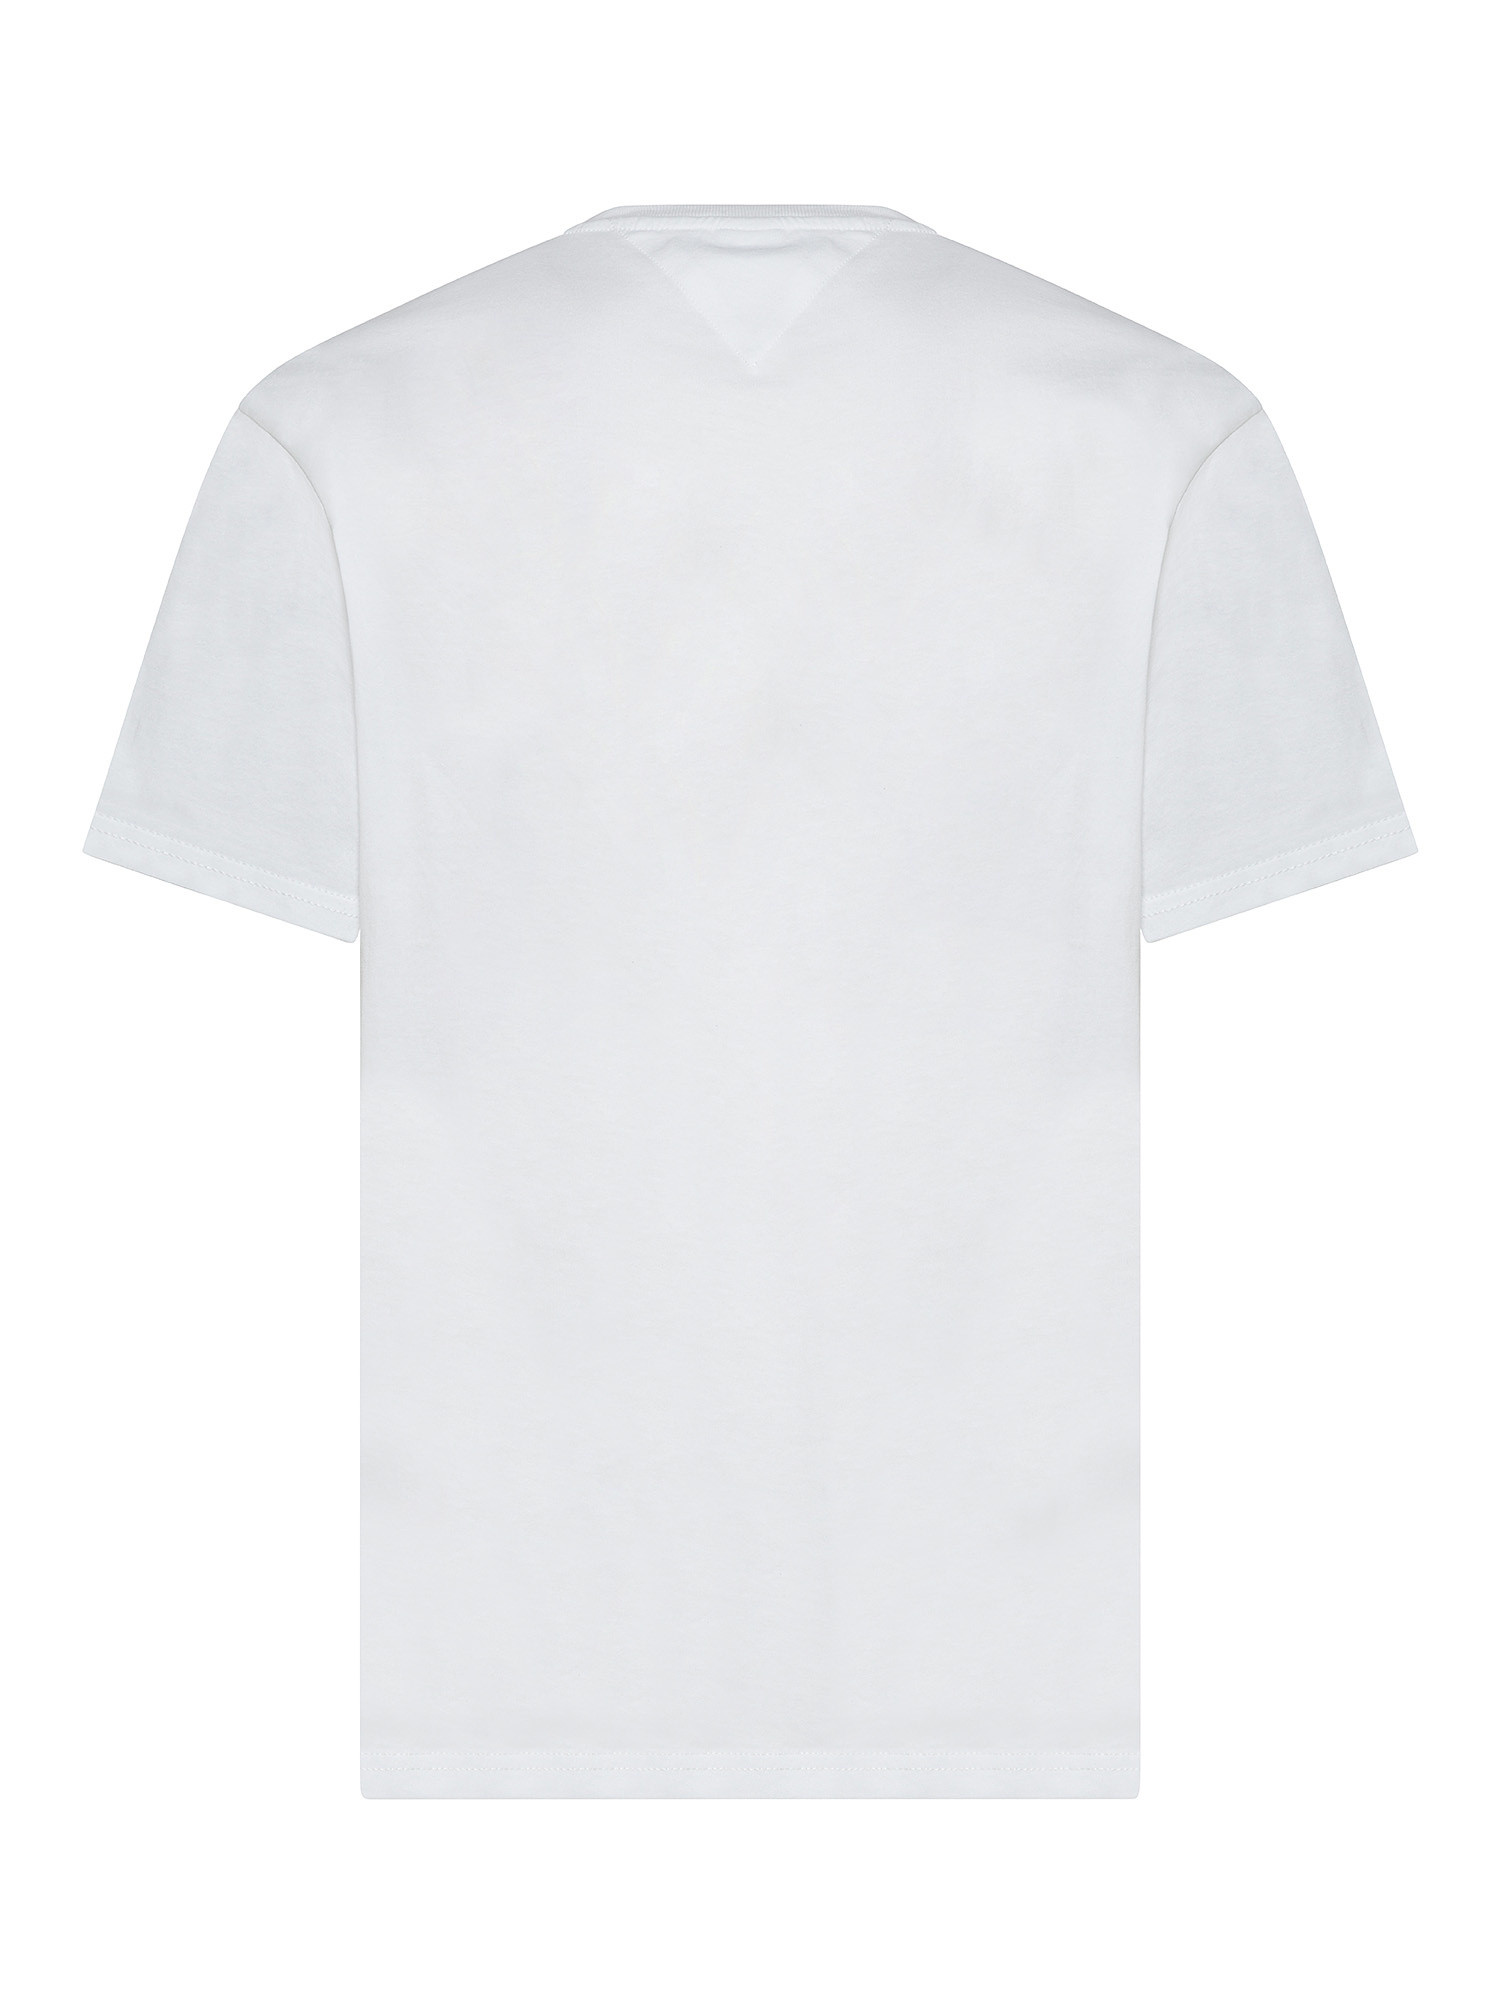 Tommy Jeans - T-shirt girocollo in cotone con logo ricamato, Bianco, large image number 1